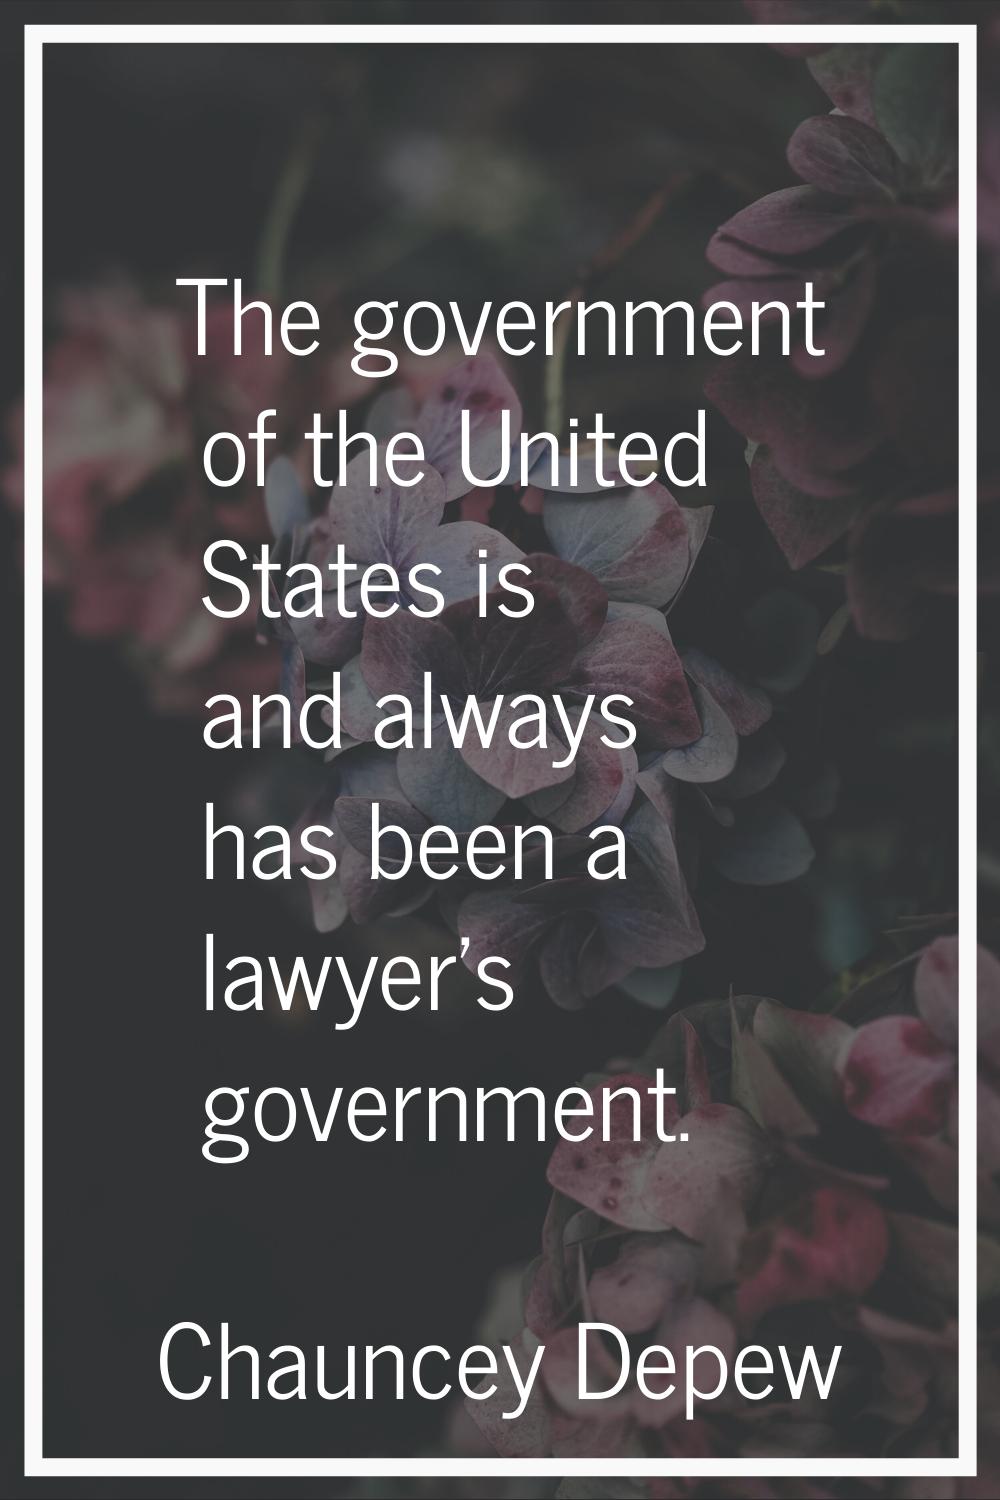 The government of the United States is and always has been a lawyer's government.